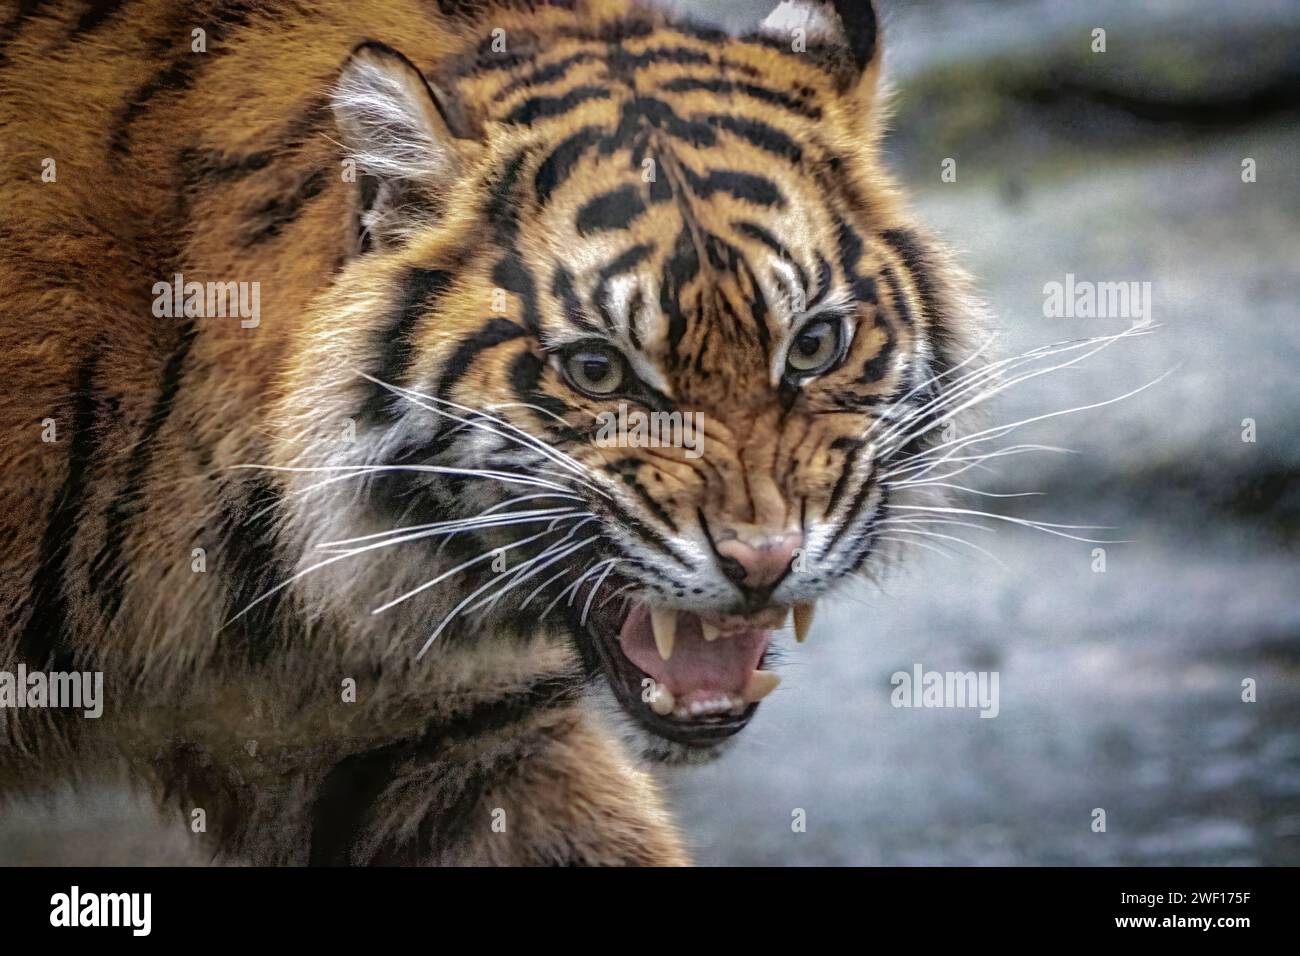 Growling tiger Stock Photo